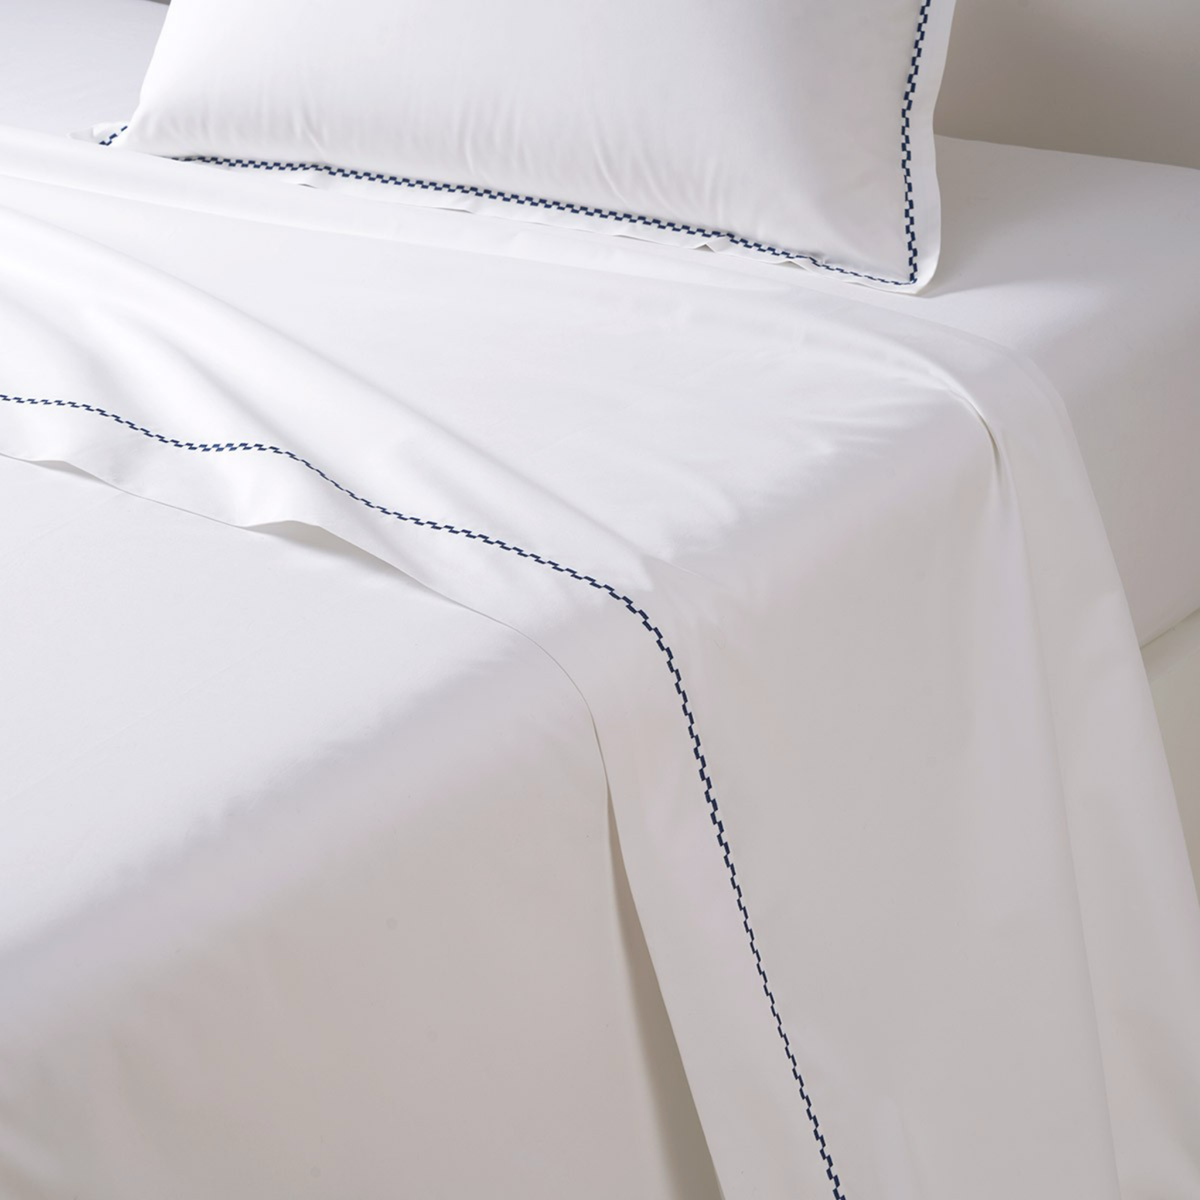 Flat Sheet of Yves Delorme Alienor Bedding in Outremer Color